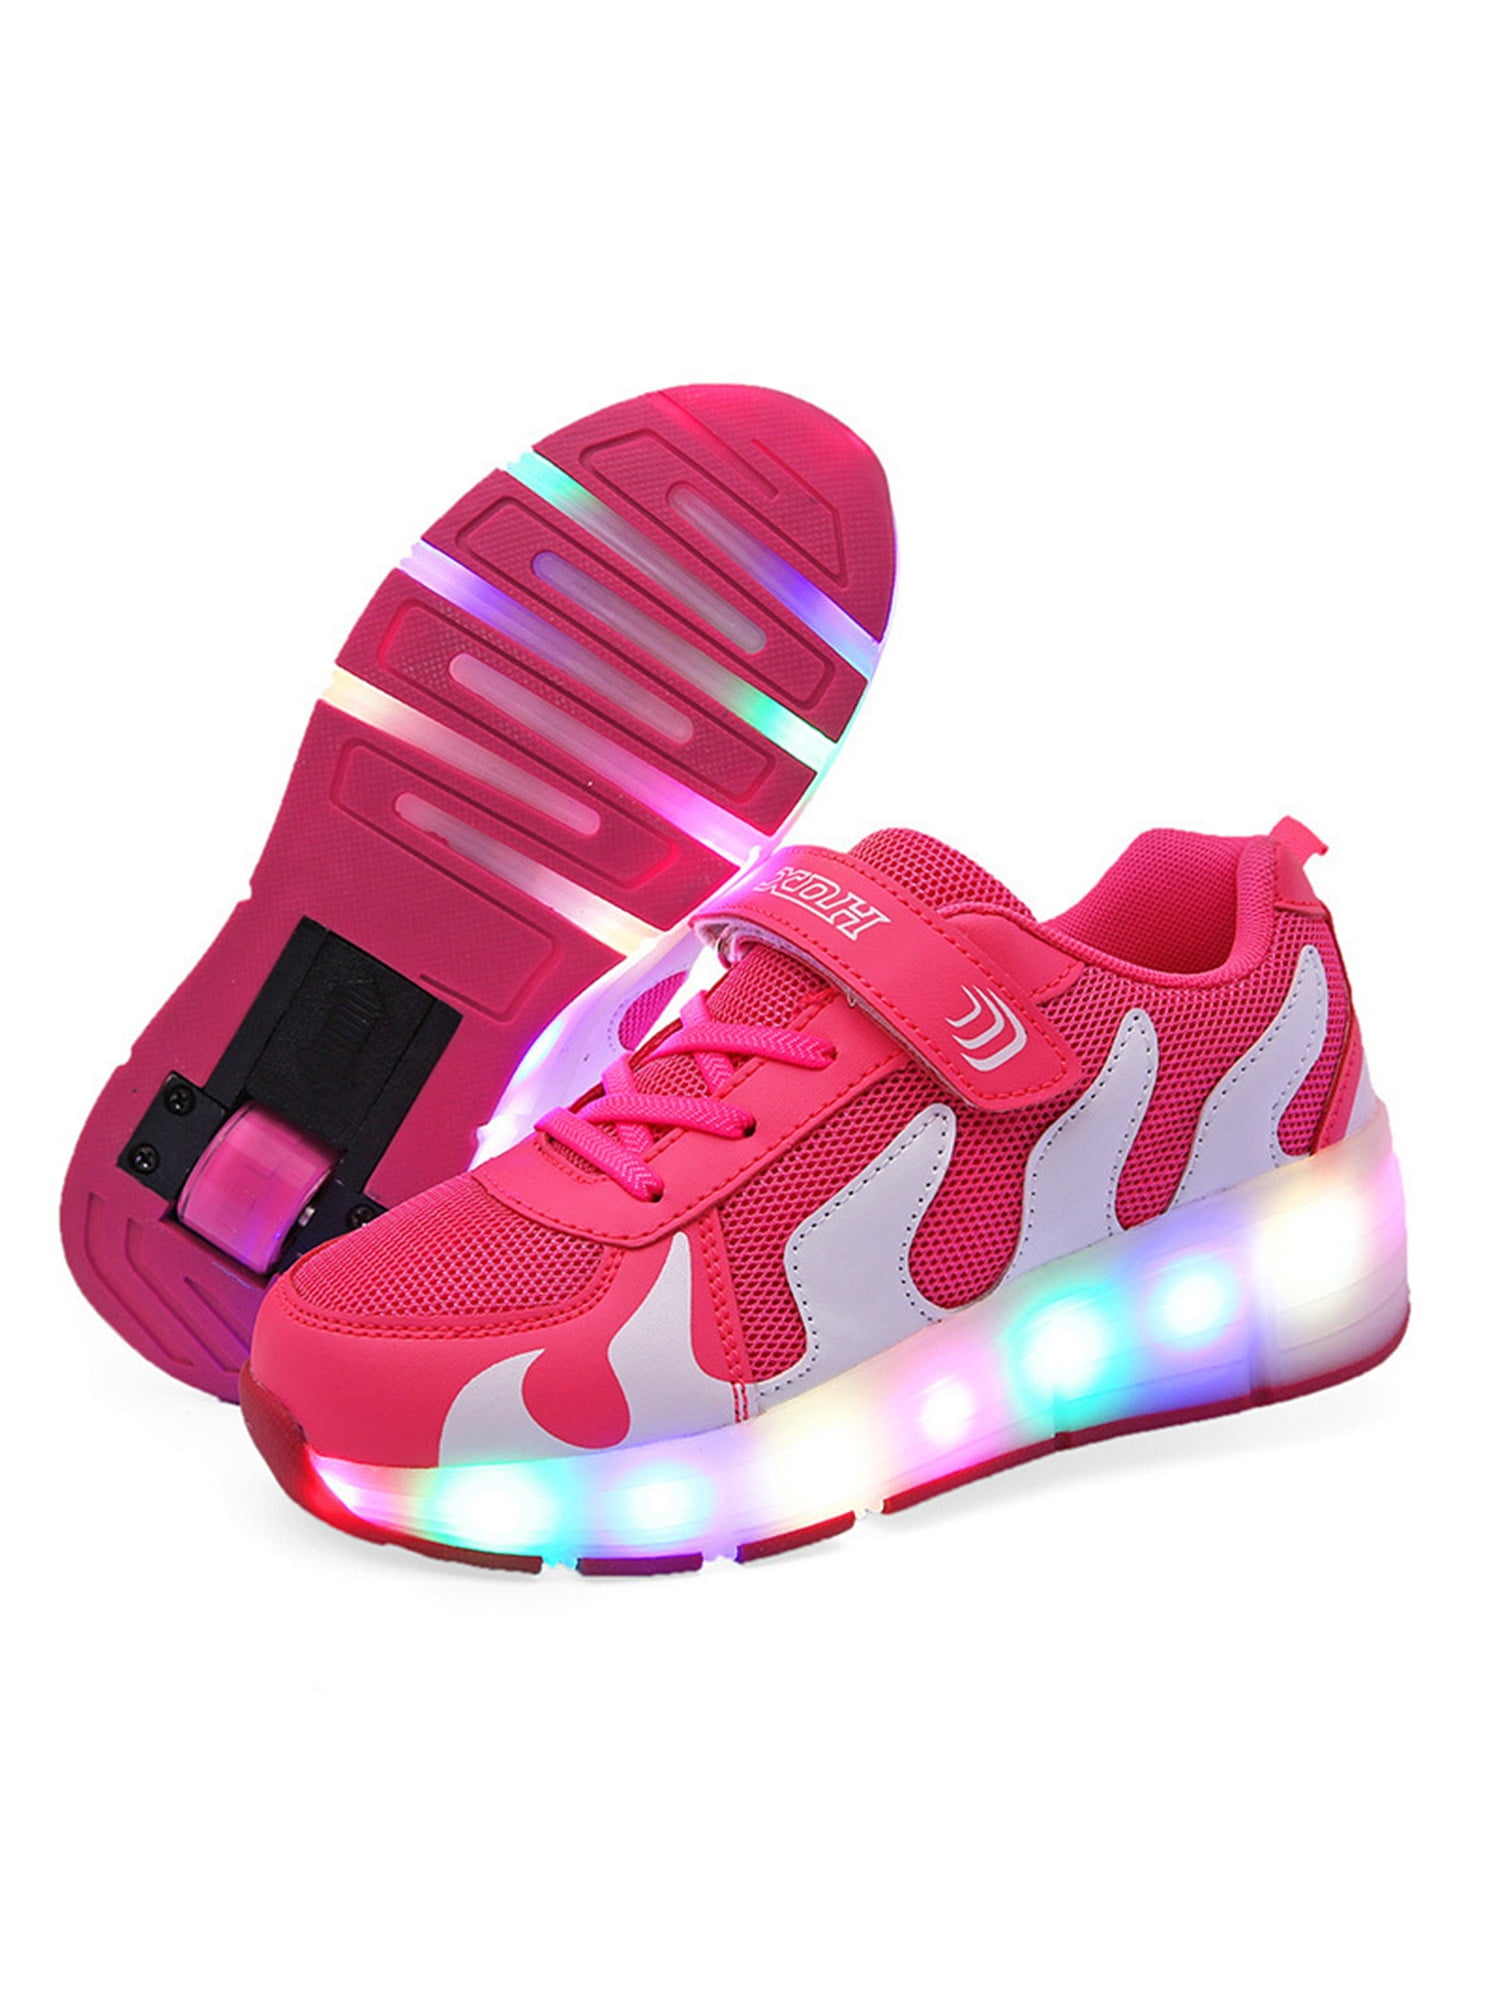 Vielone_Lumi Toddler Kids Boys Girls Rollers Skate Shoes LED Sneakers Light up Hook and Loop Tennis Shoes Luminous Walking Shoes Flashing Hiking Boots for Outdoor Sports 